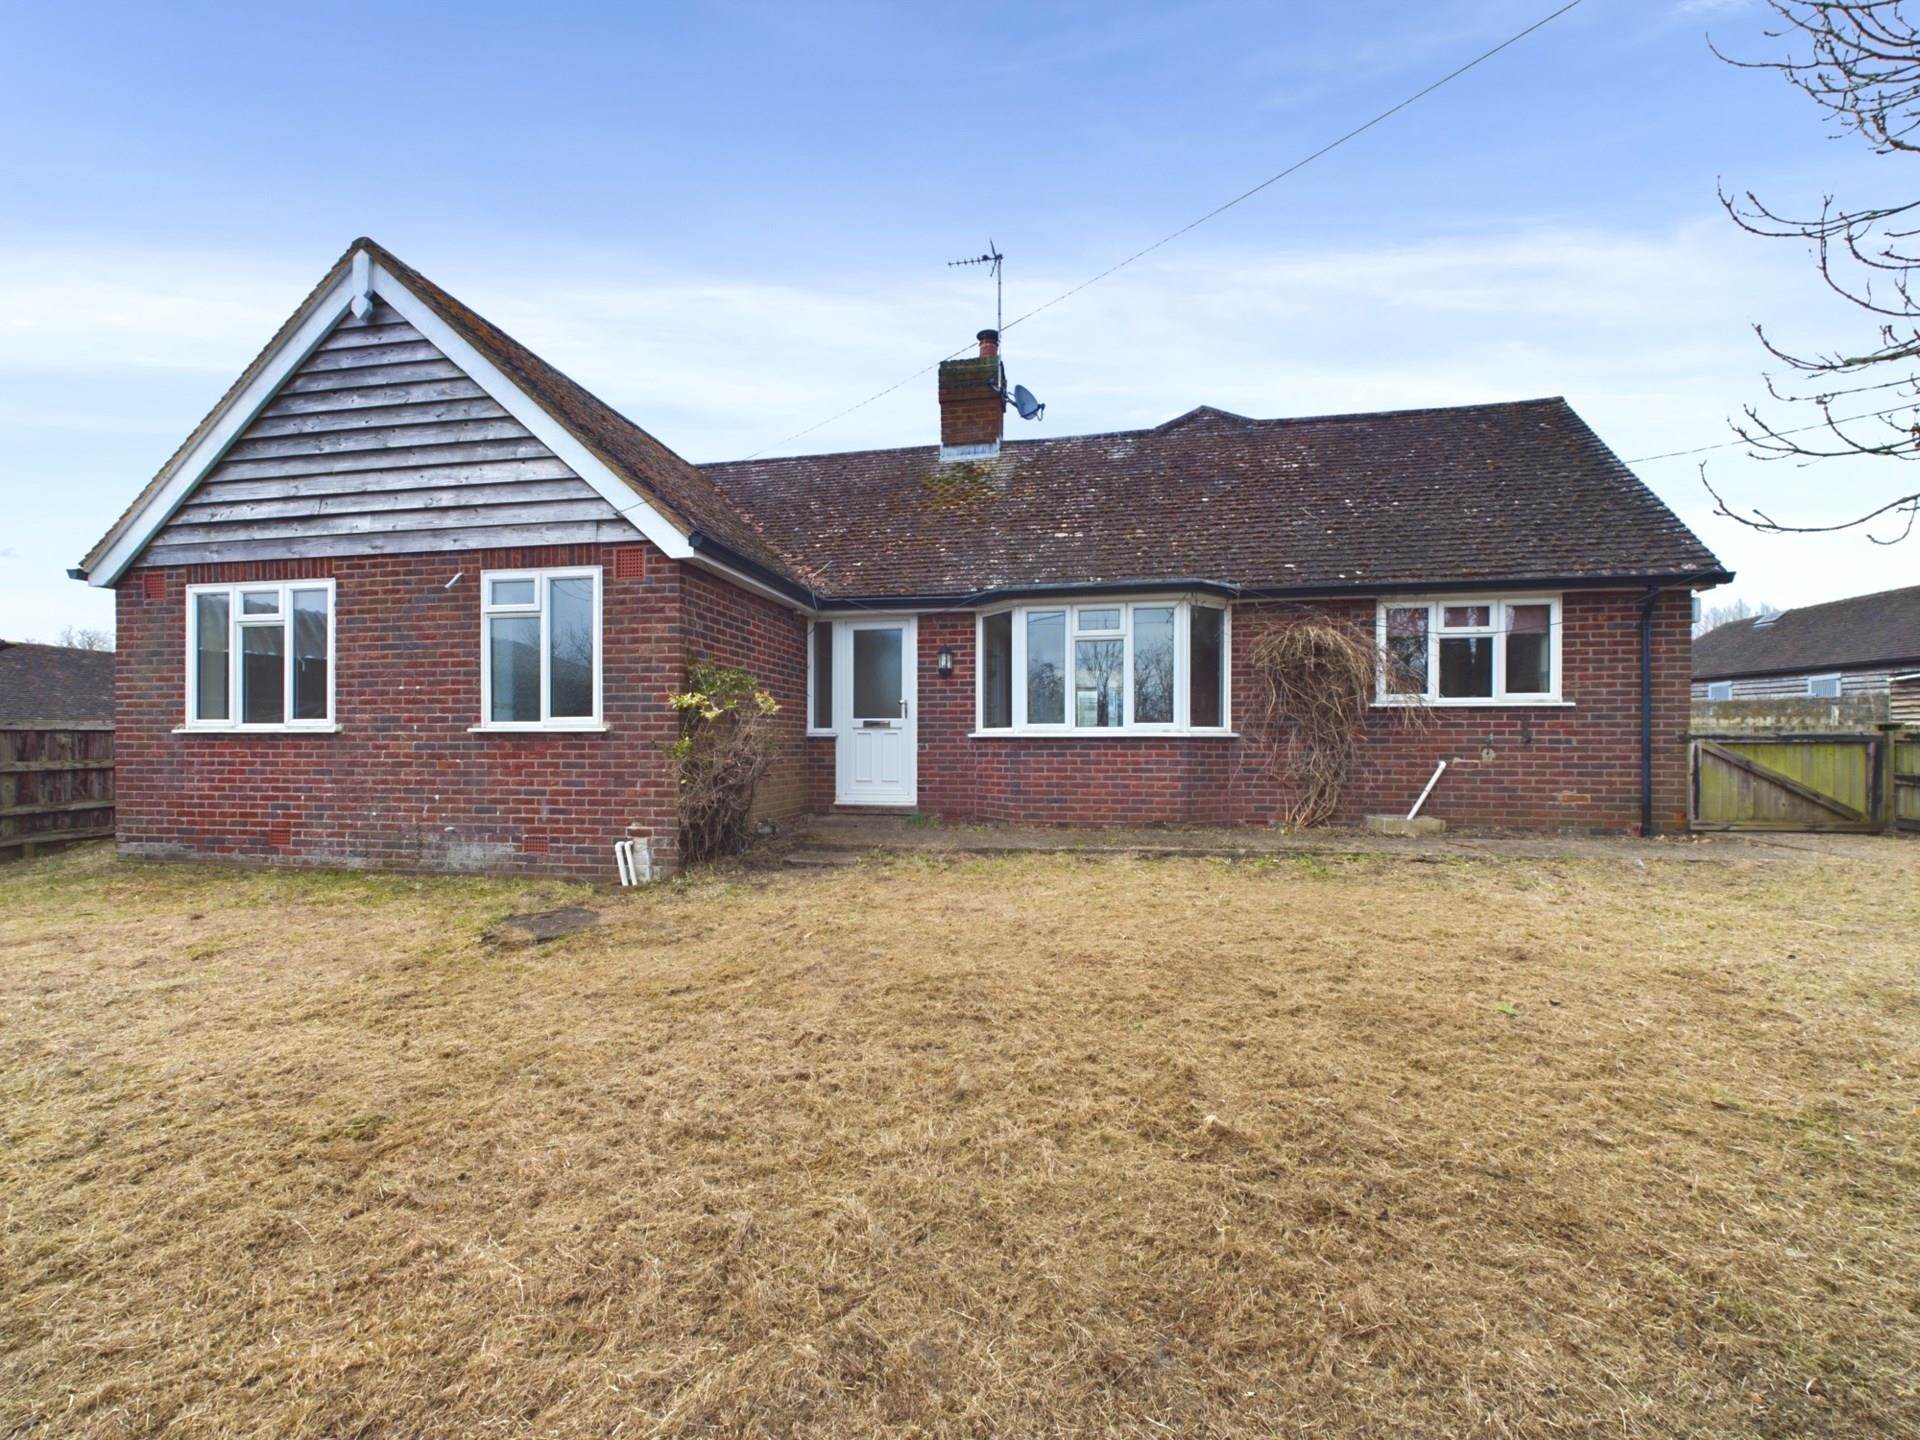 3 bed Detached bungalow for rent in Thame. From Bonners & Babingtons - Chinnor